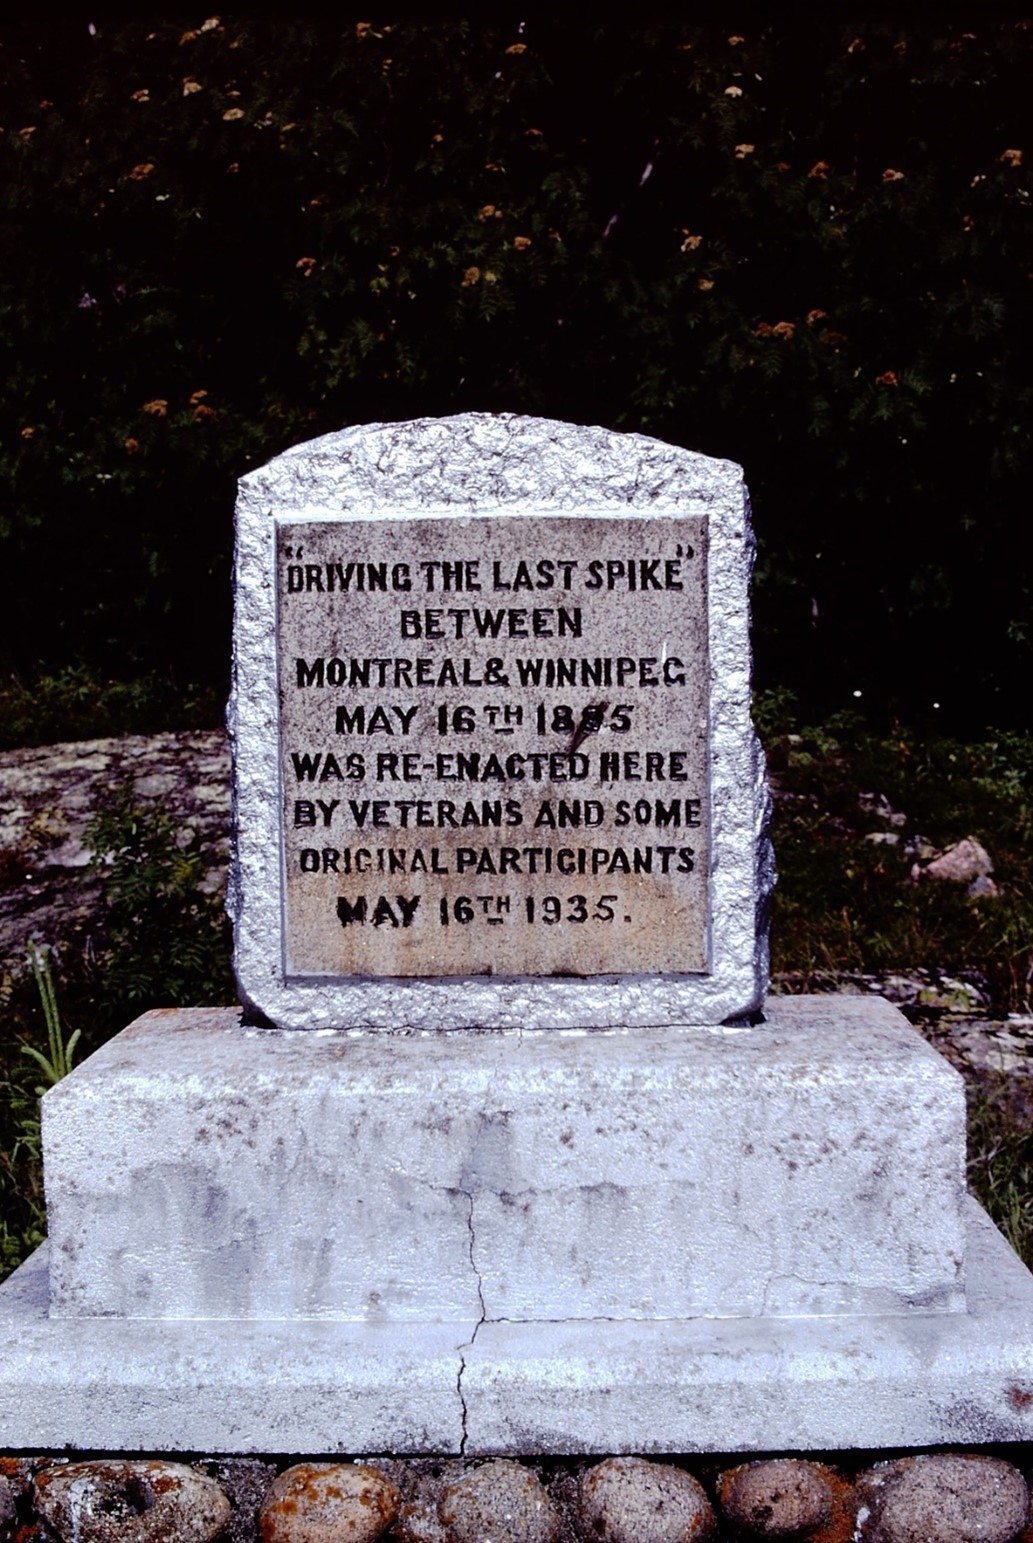 Cairn marking the location of the “Last Spike” Between Montreal and Winnipeg